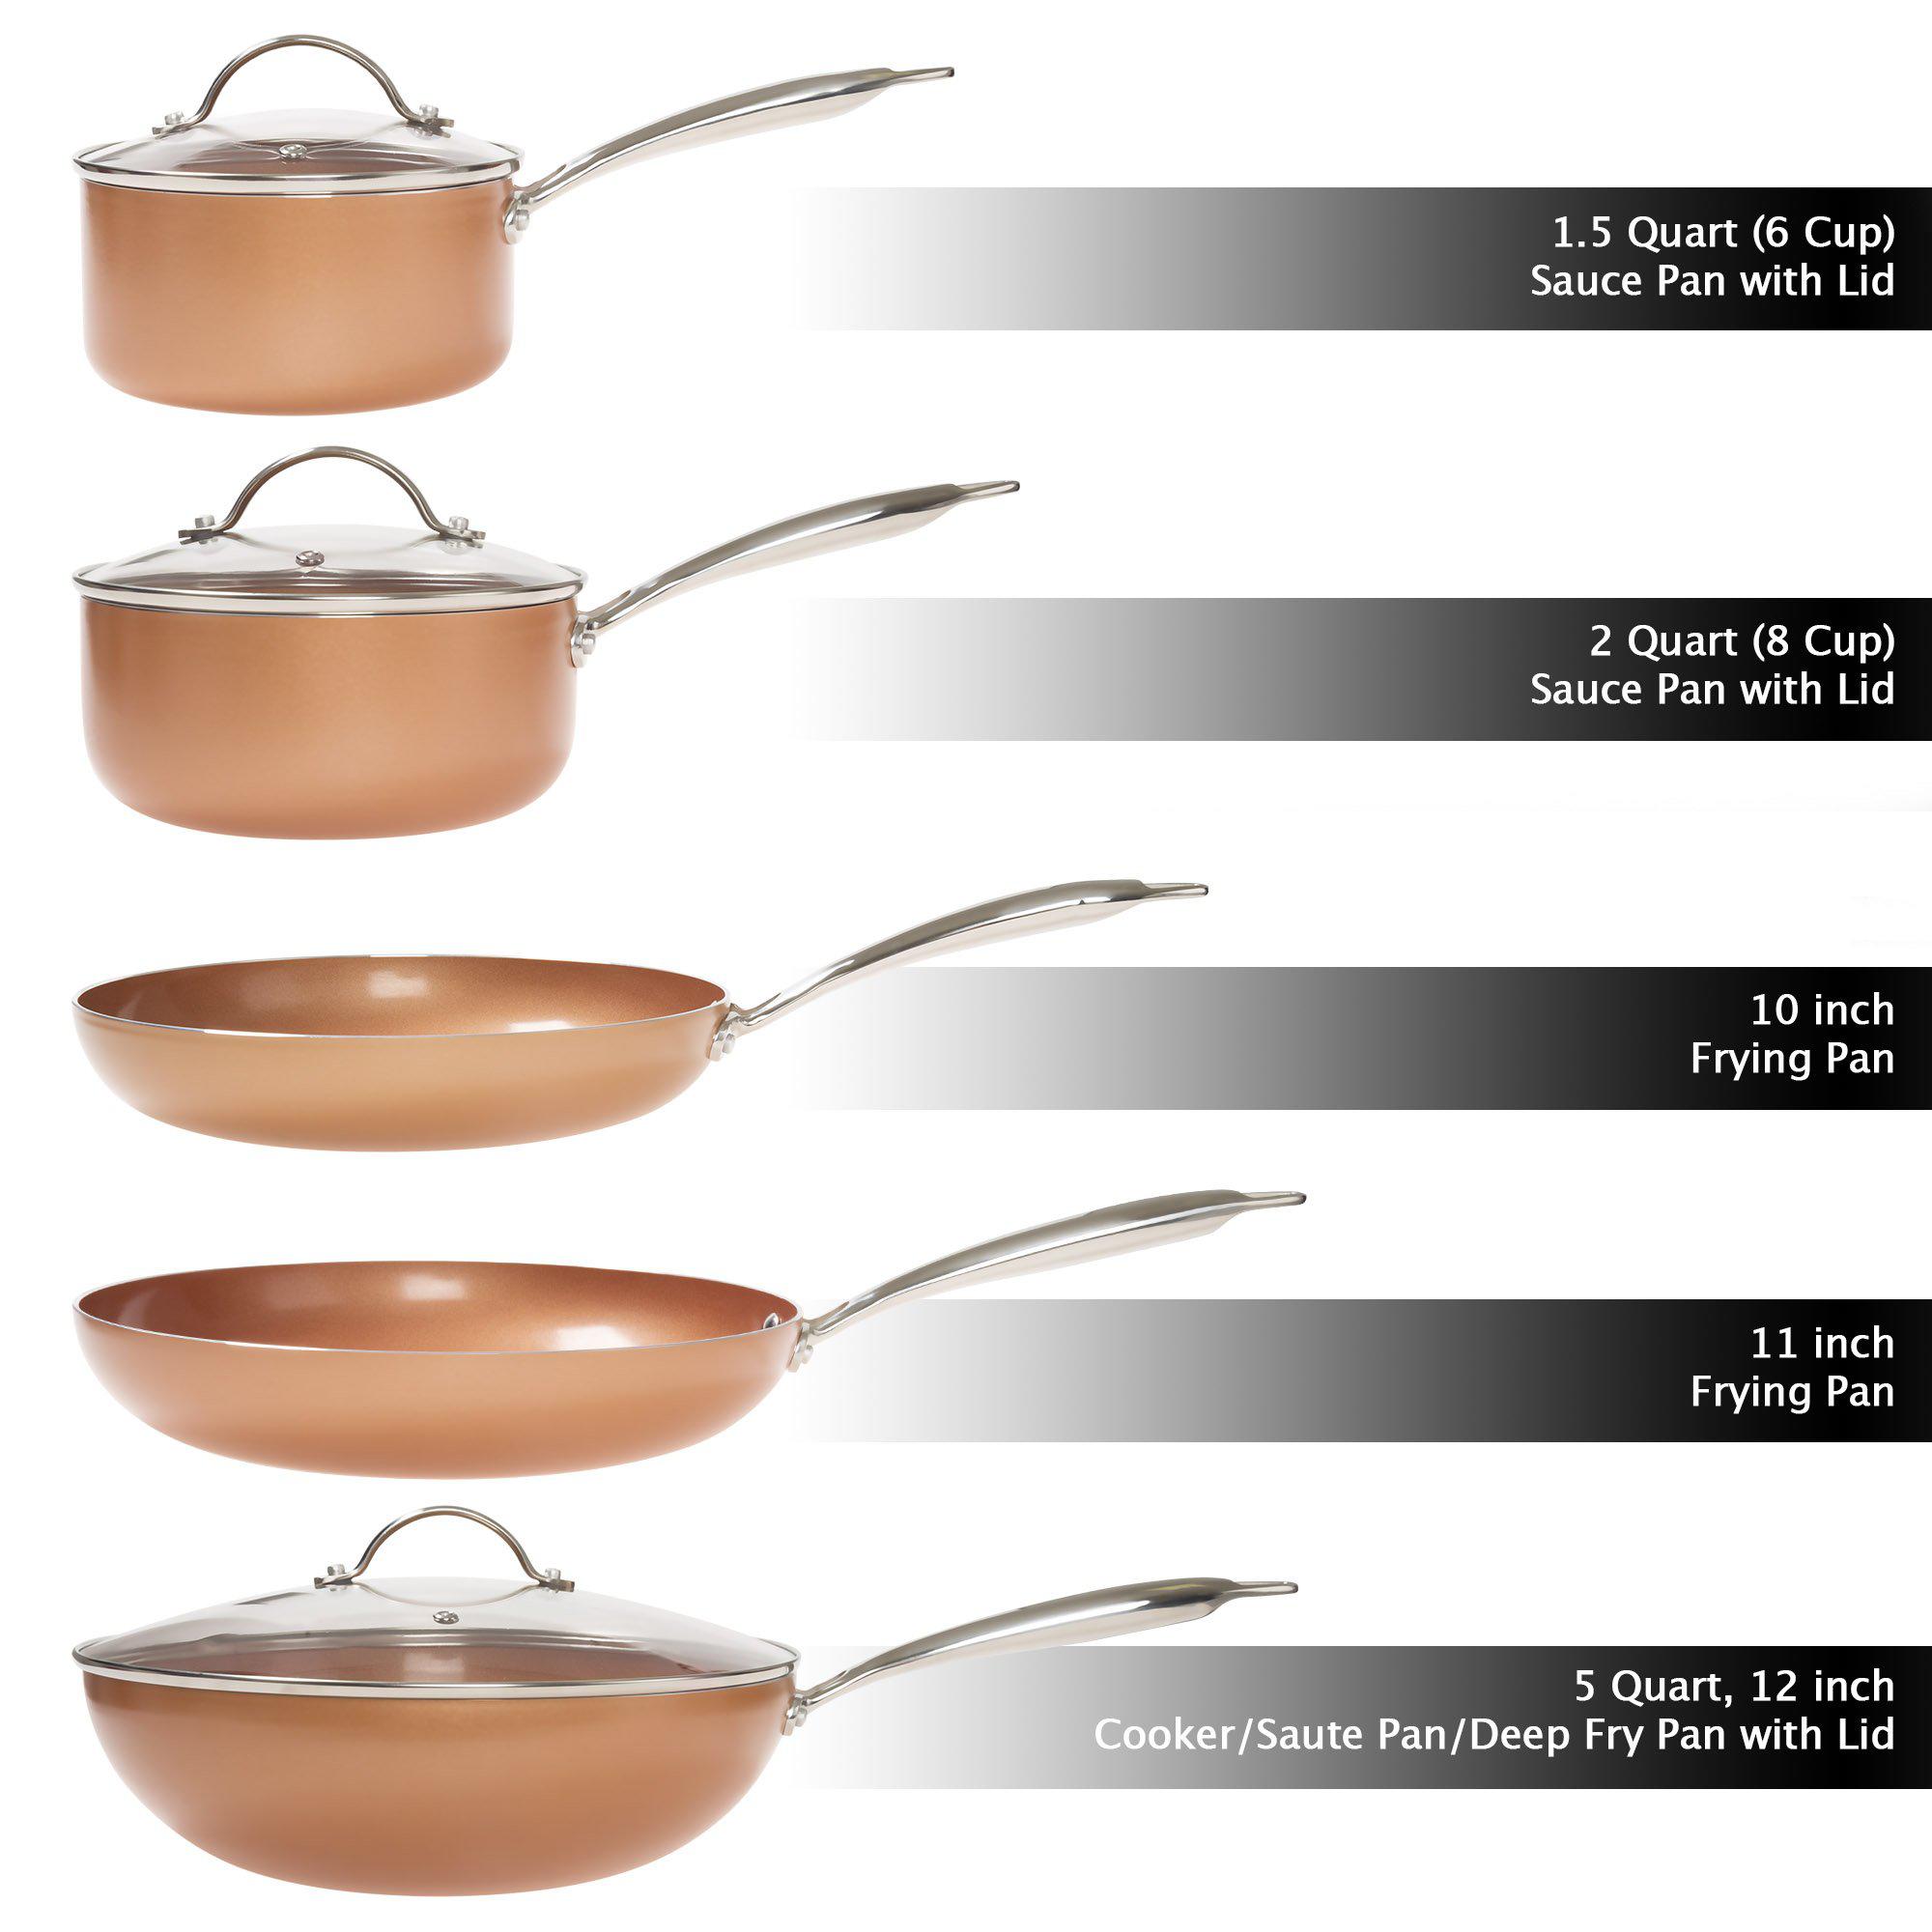 Classic Cuisine 8 pc cookware set with 2 layer nonstick ceramic coating, tempered glass lid, copper color finish dishwasher oven safe allumi-